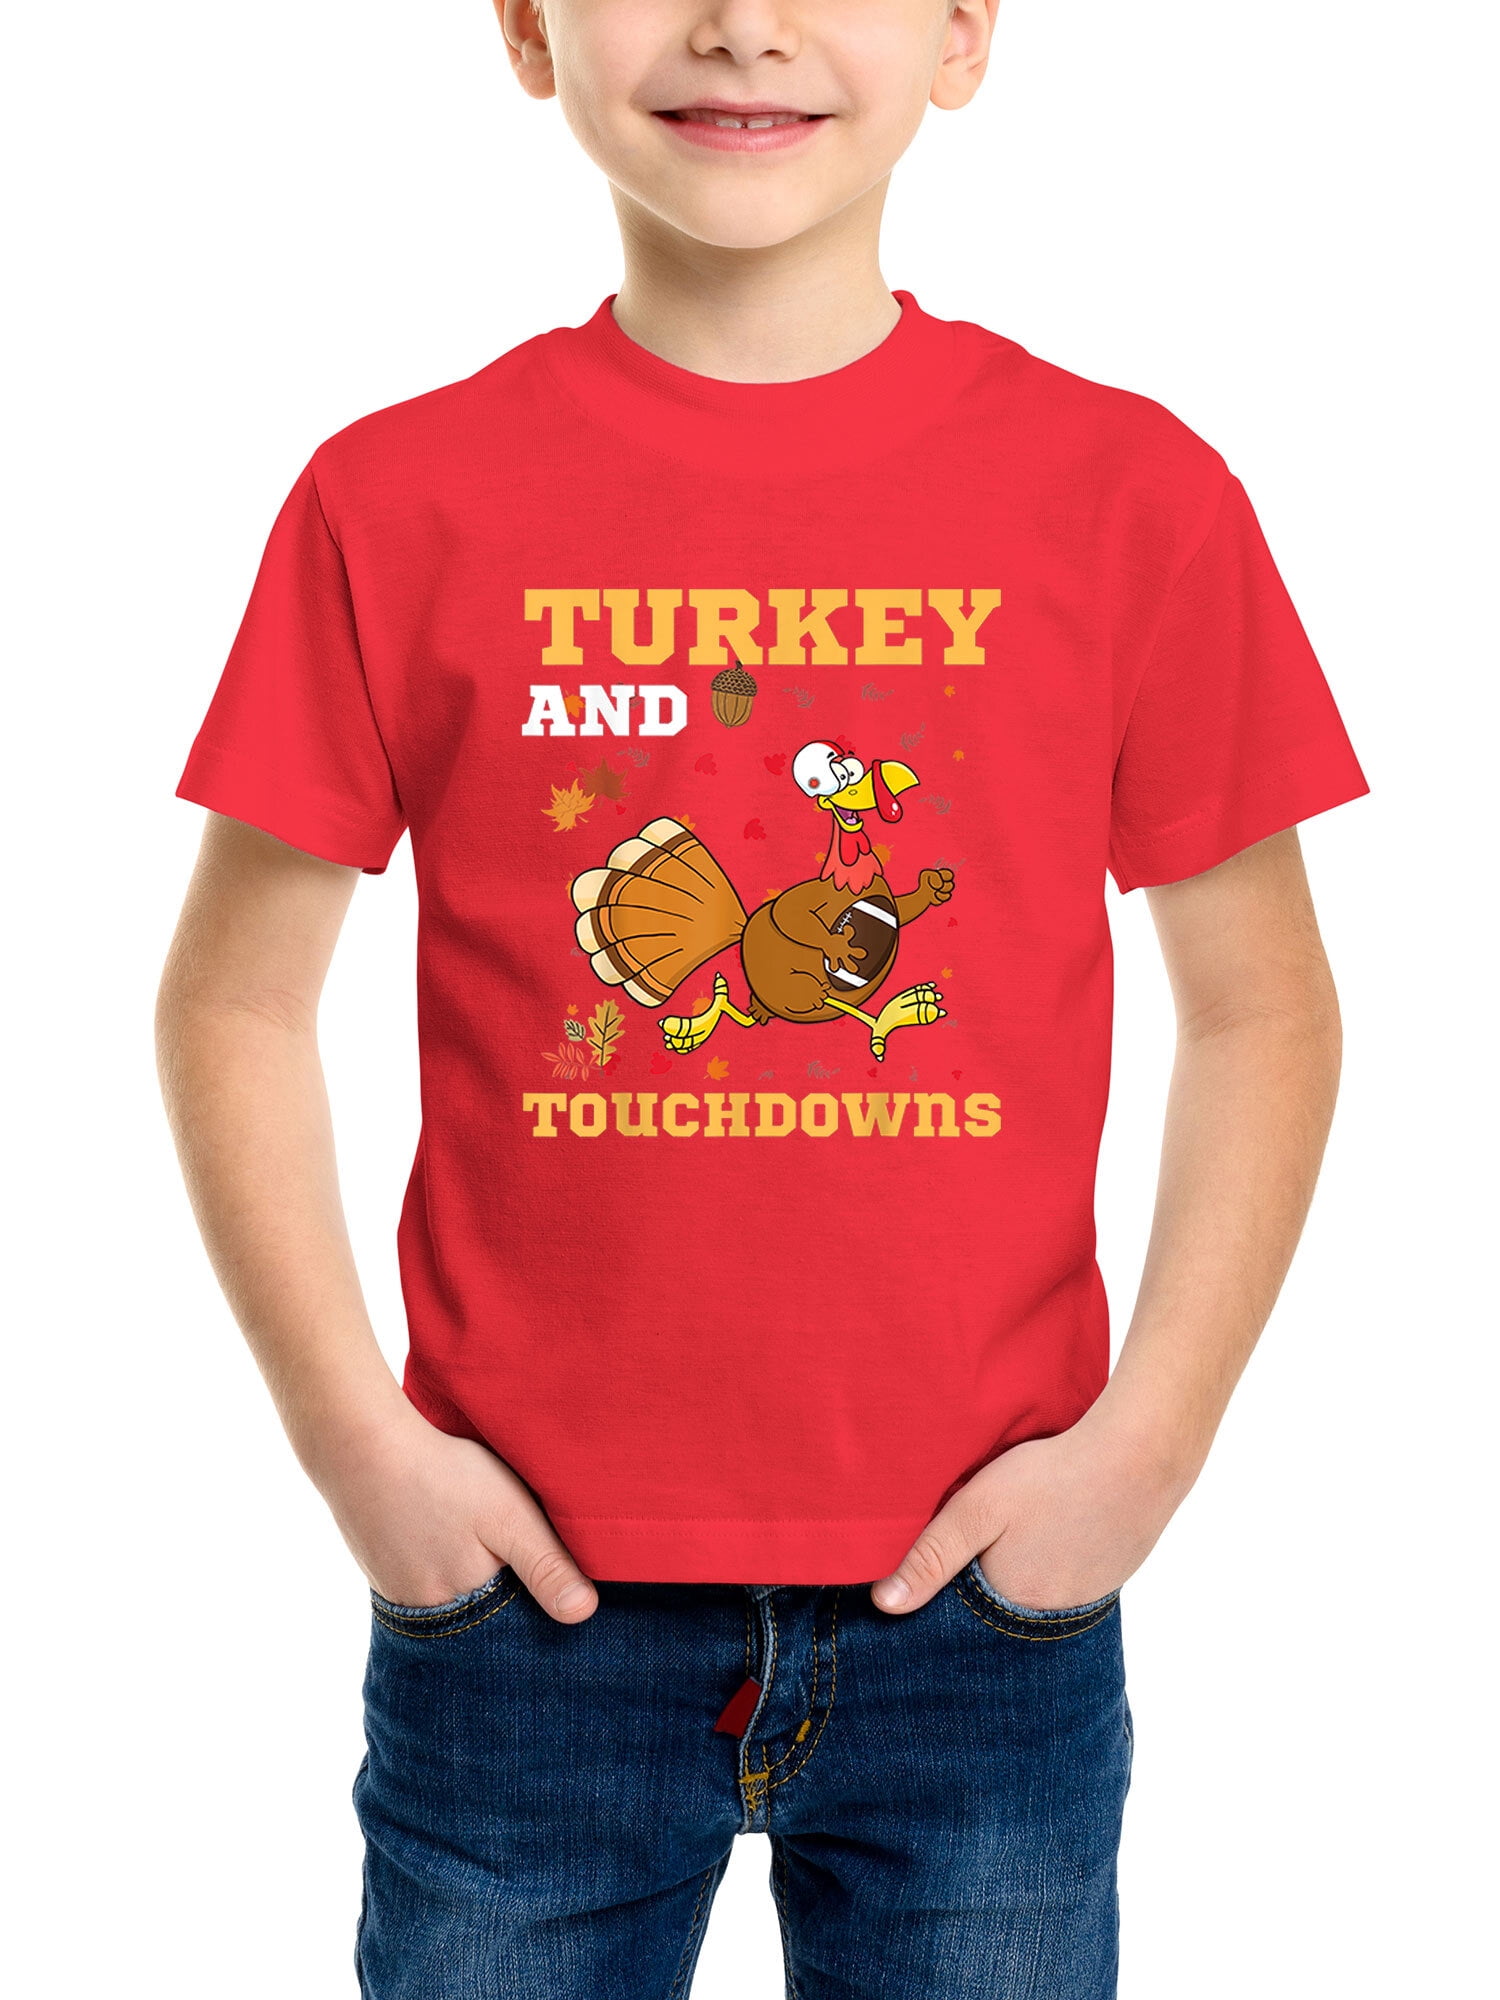 TURKEY AND TOUCHDOWNS FALL BABY GIRL CLOTHES FOOTBALL BABY GIRL BODYSUIT OR T-SHIRT